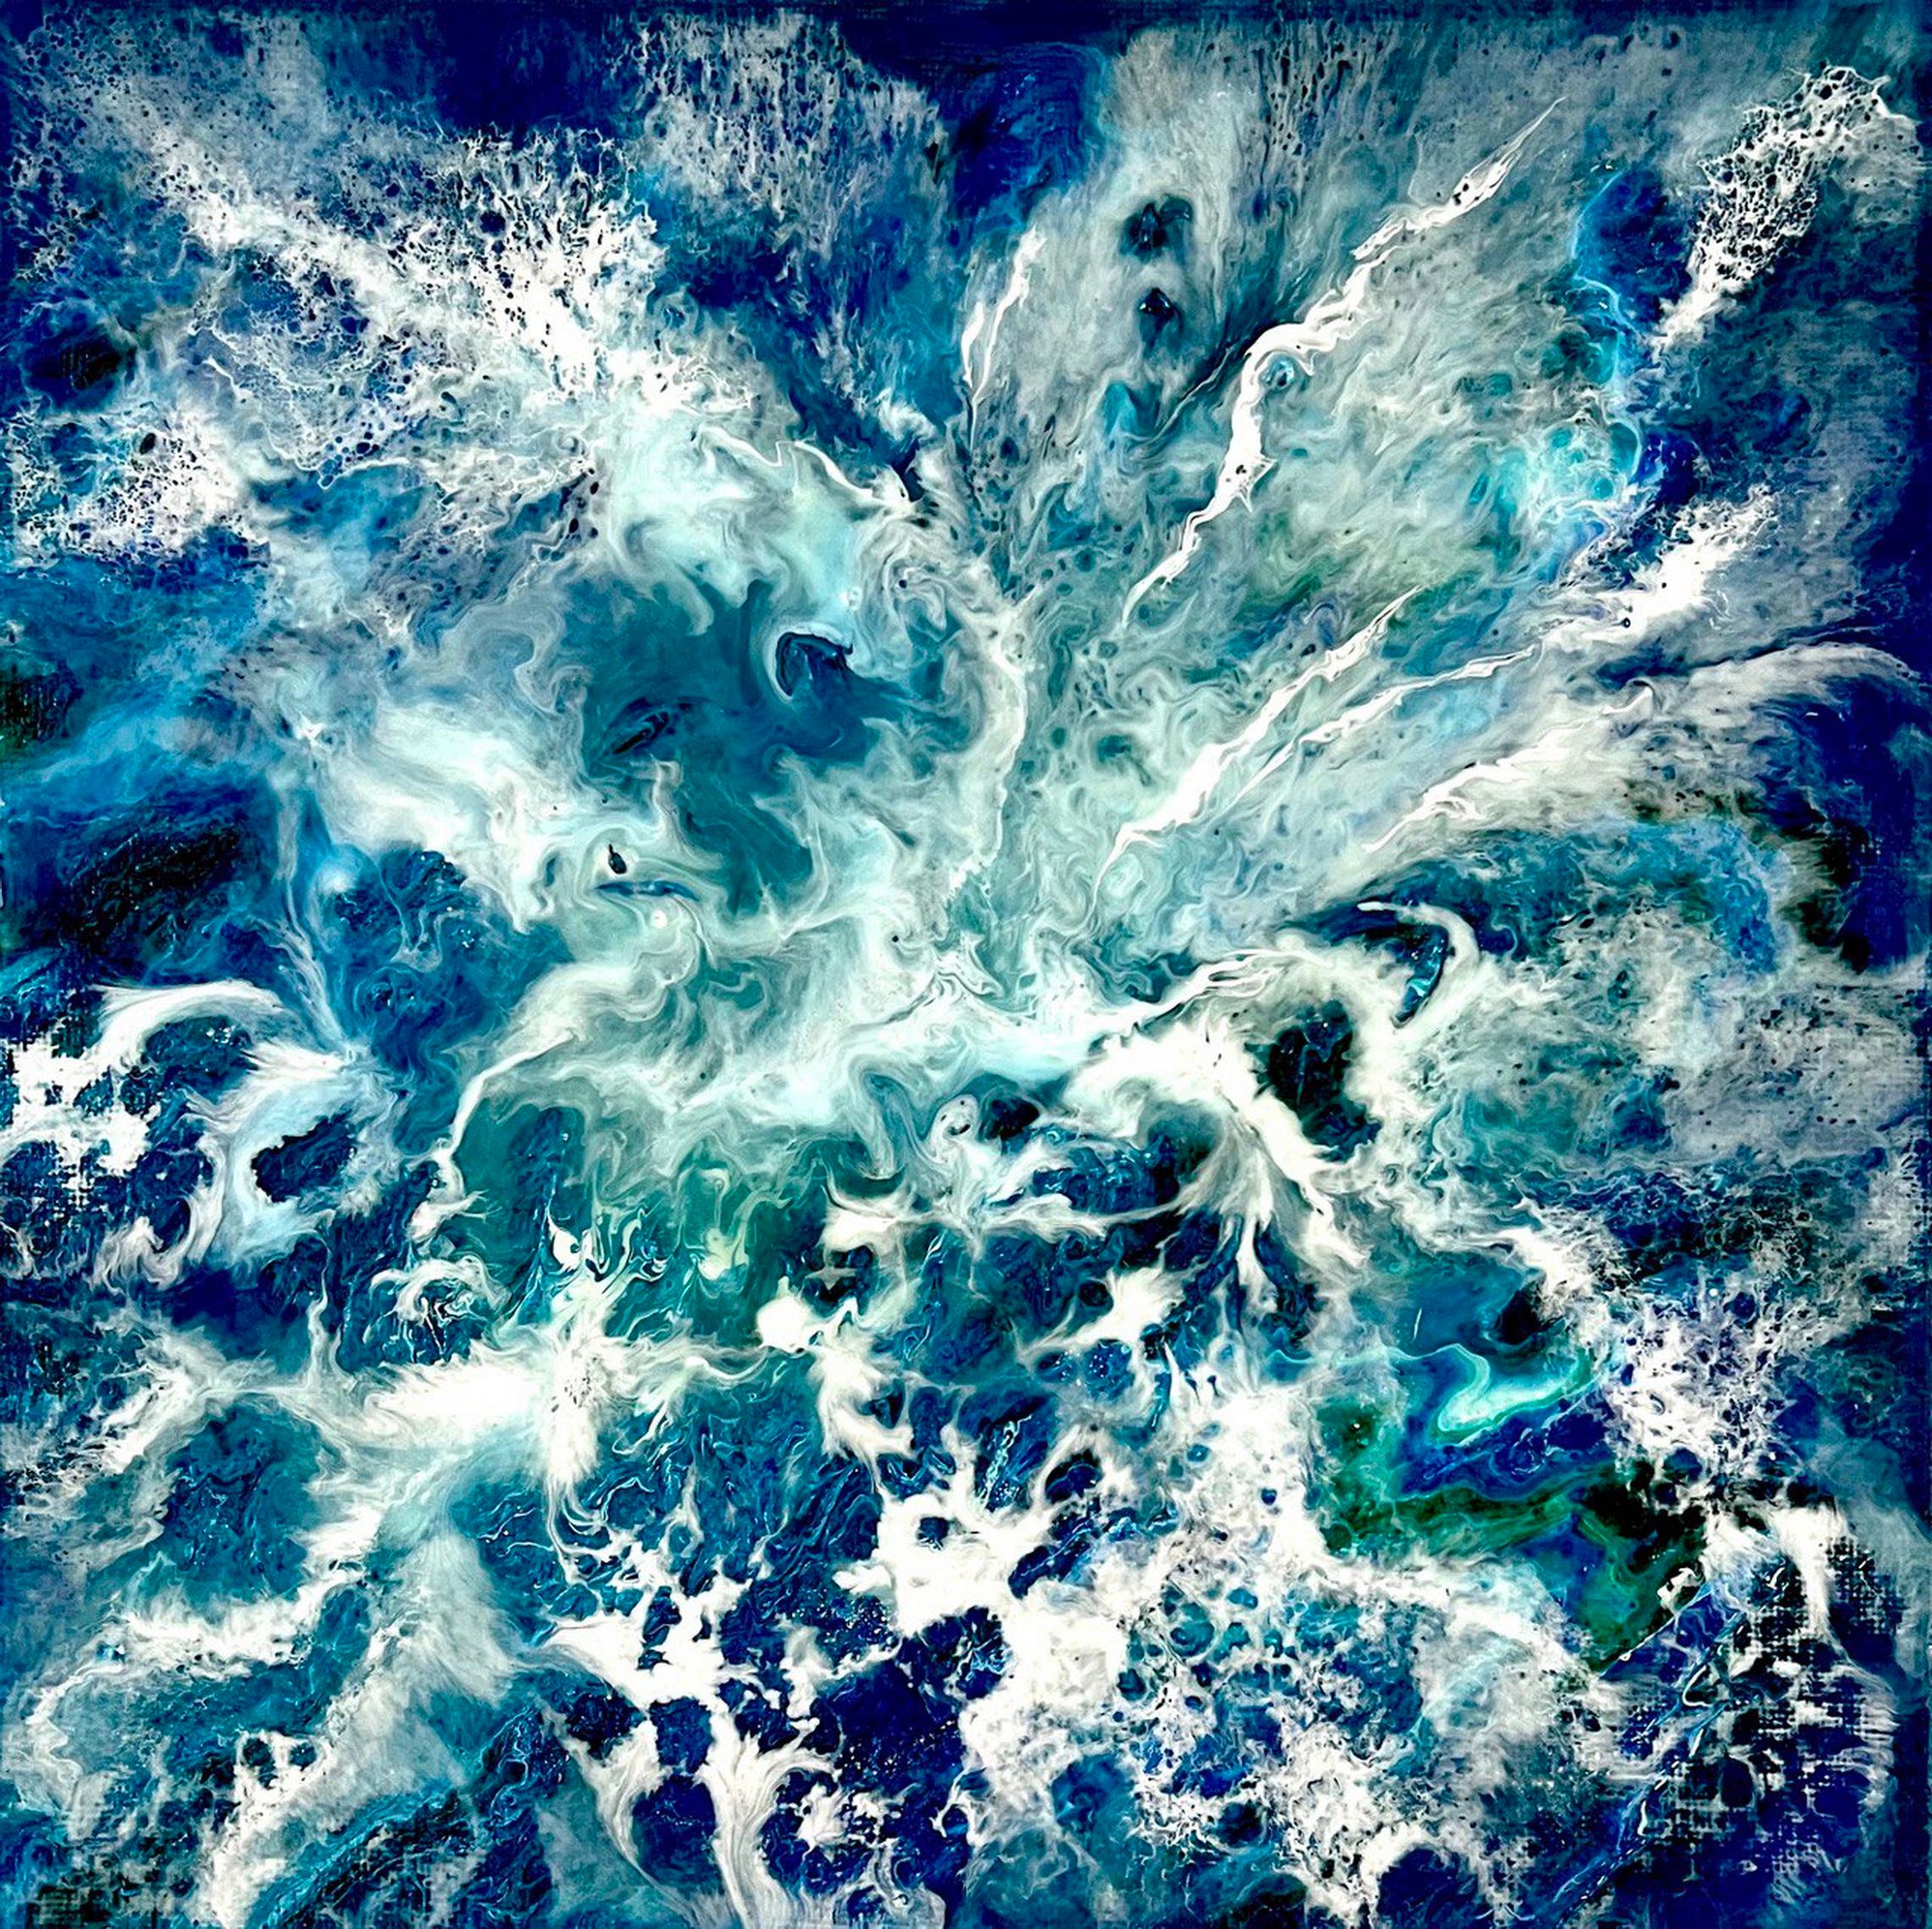   Oceania Celebration. Abstract expressionism. Sea / Water / Waves /40*40 cm. - Abstract Expressionist Painting by Vik Schroeder 